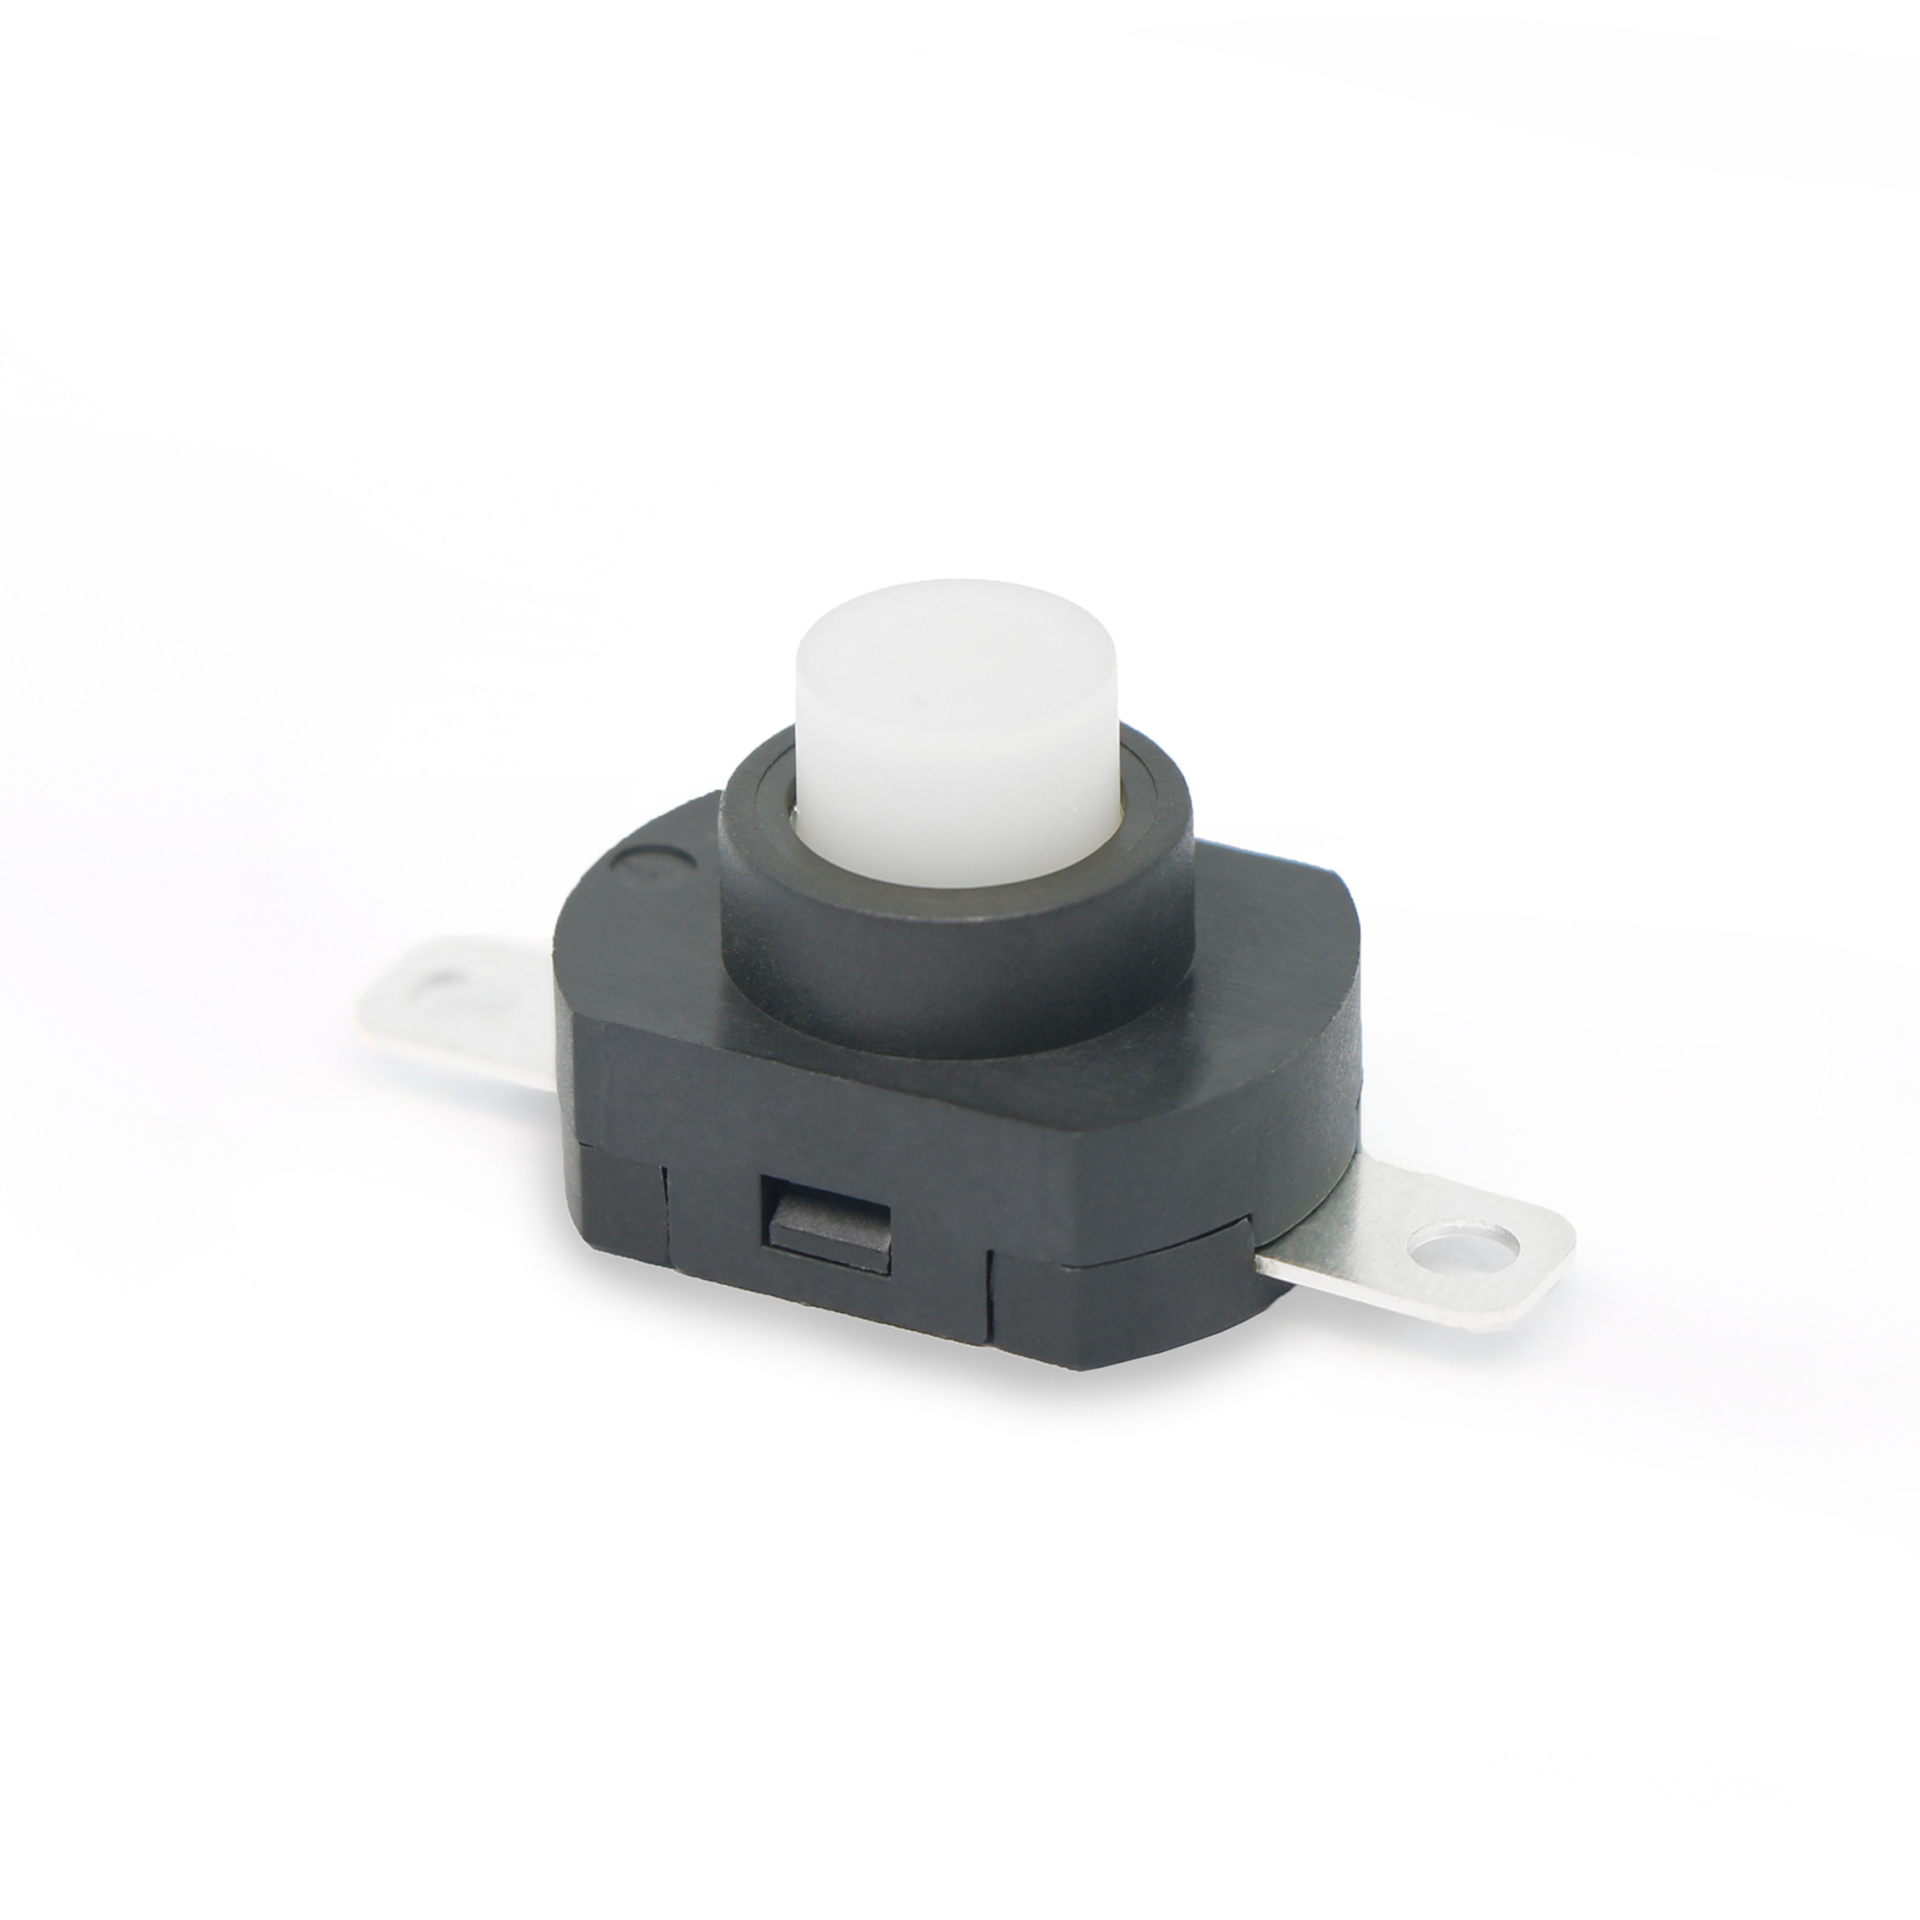 PS6 push button switch